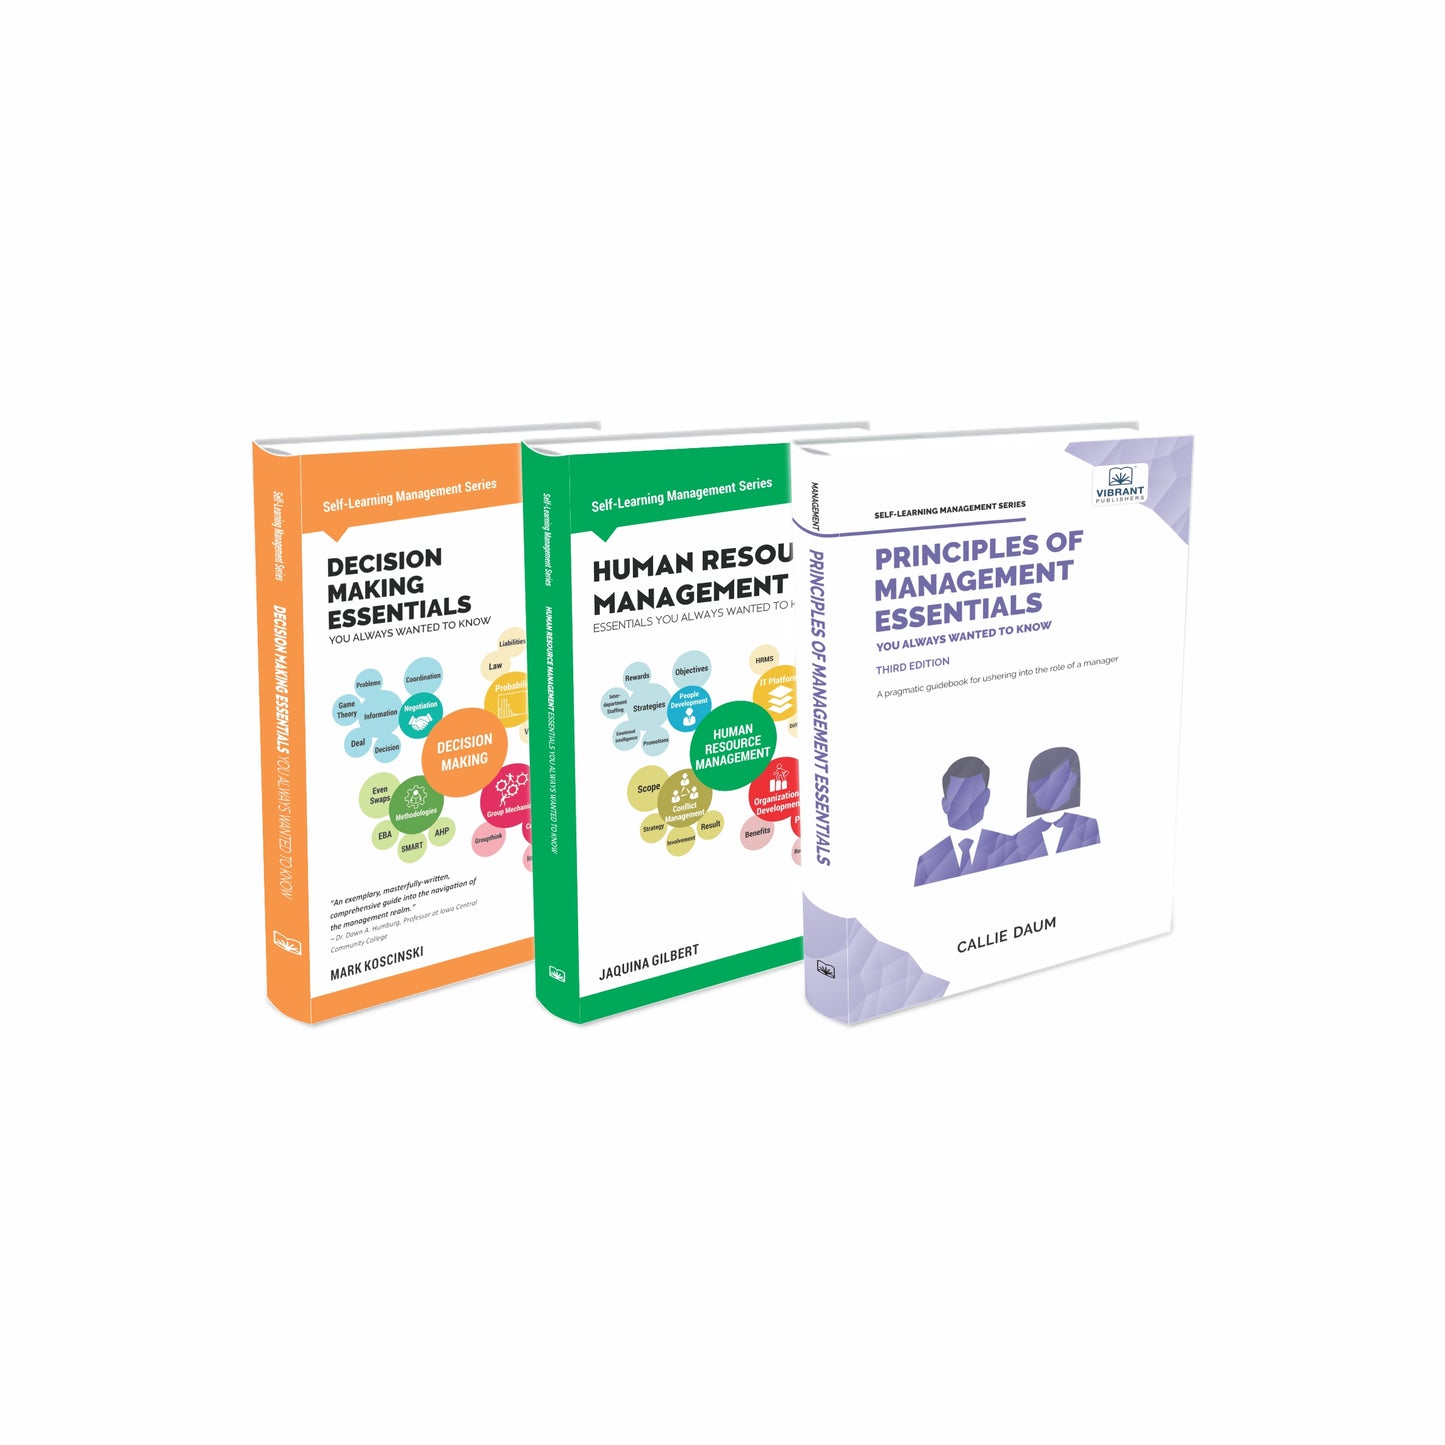 Management Essentials for Working Professionals with focus on Decision Making and People (Human Resource) Management – Includes Practice Exercises, Case Studies, Solved Examples, Real Life Scenarios